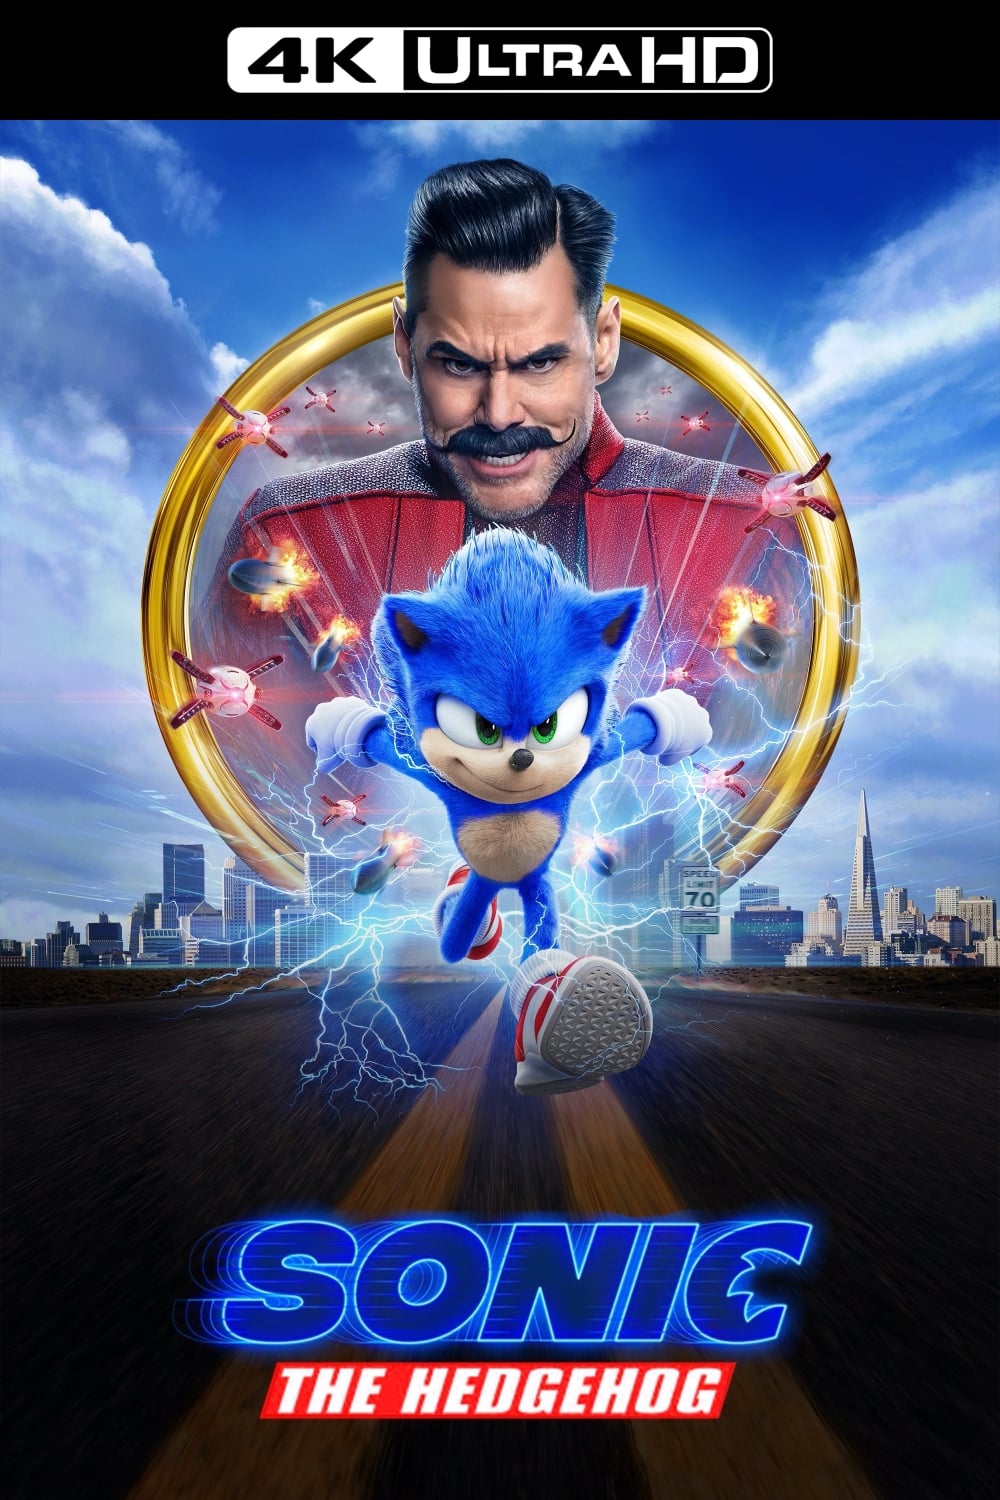 Sonic the Hedgehog POSTER